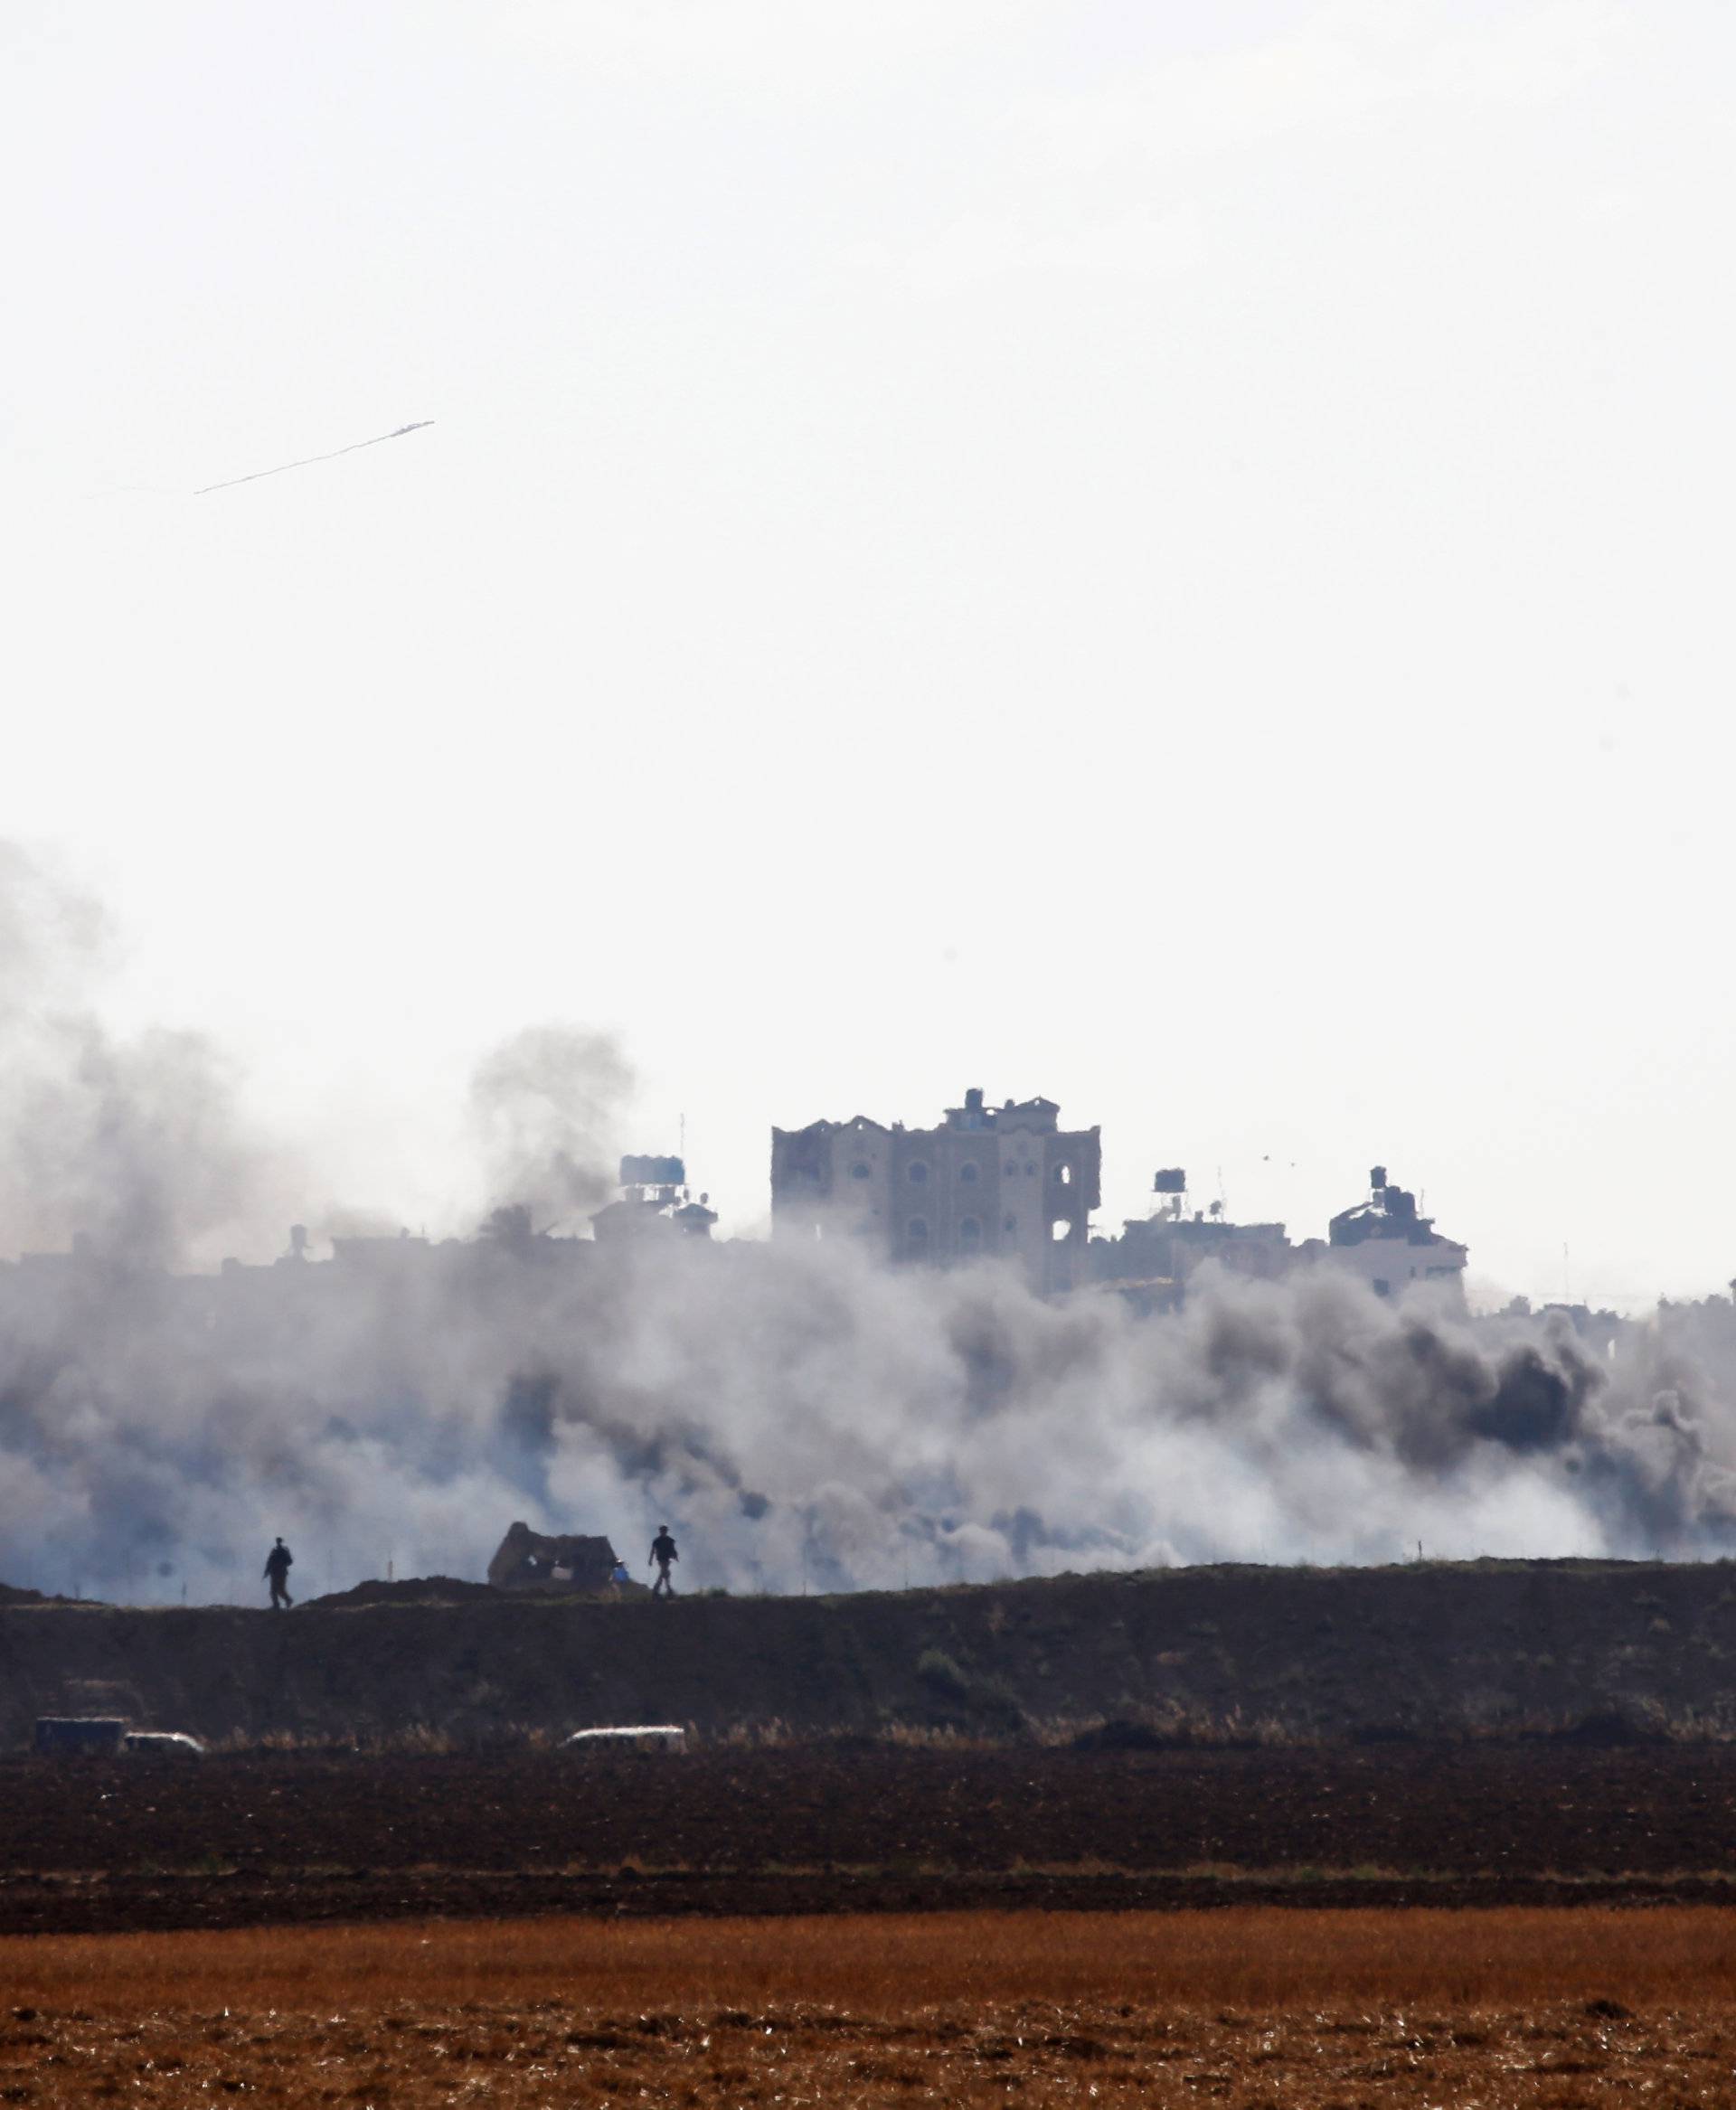 Israeli soldiers walk next to the border between Israel and Gaza as smoke can be seen in the Gaza Strip from the Israeli side